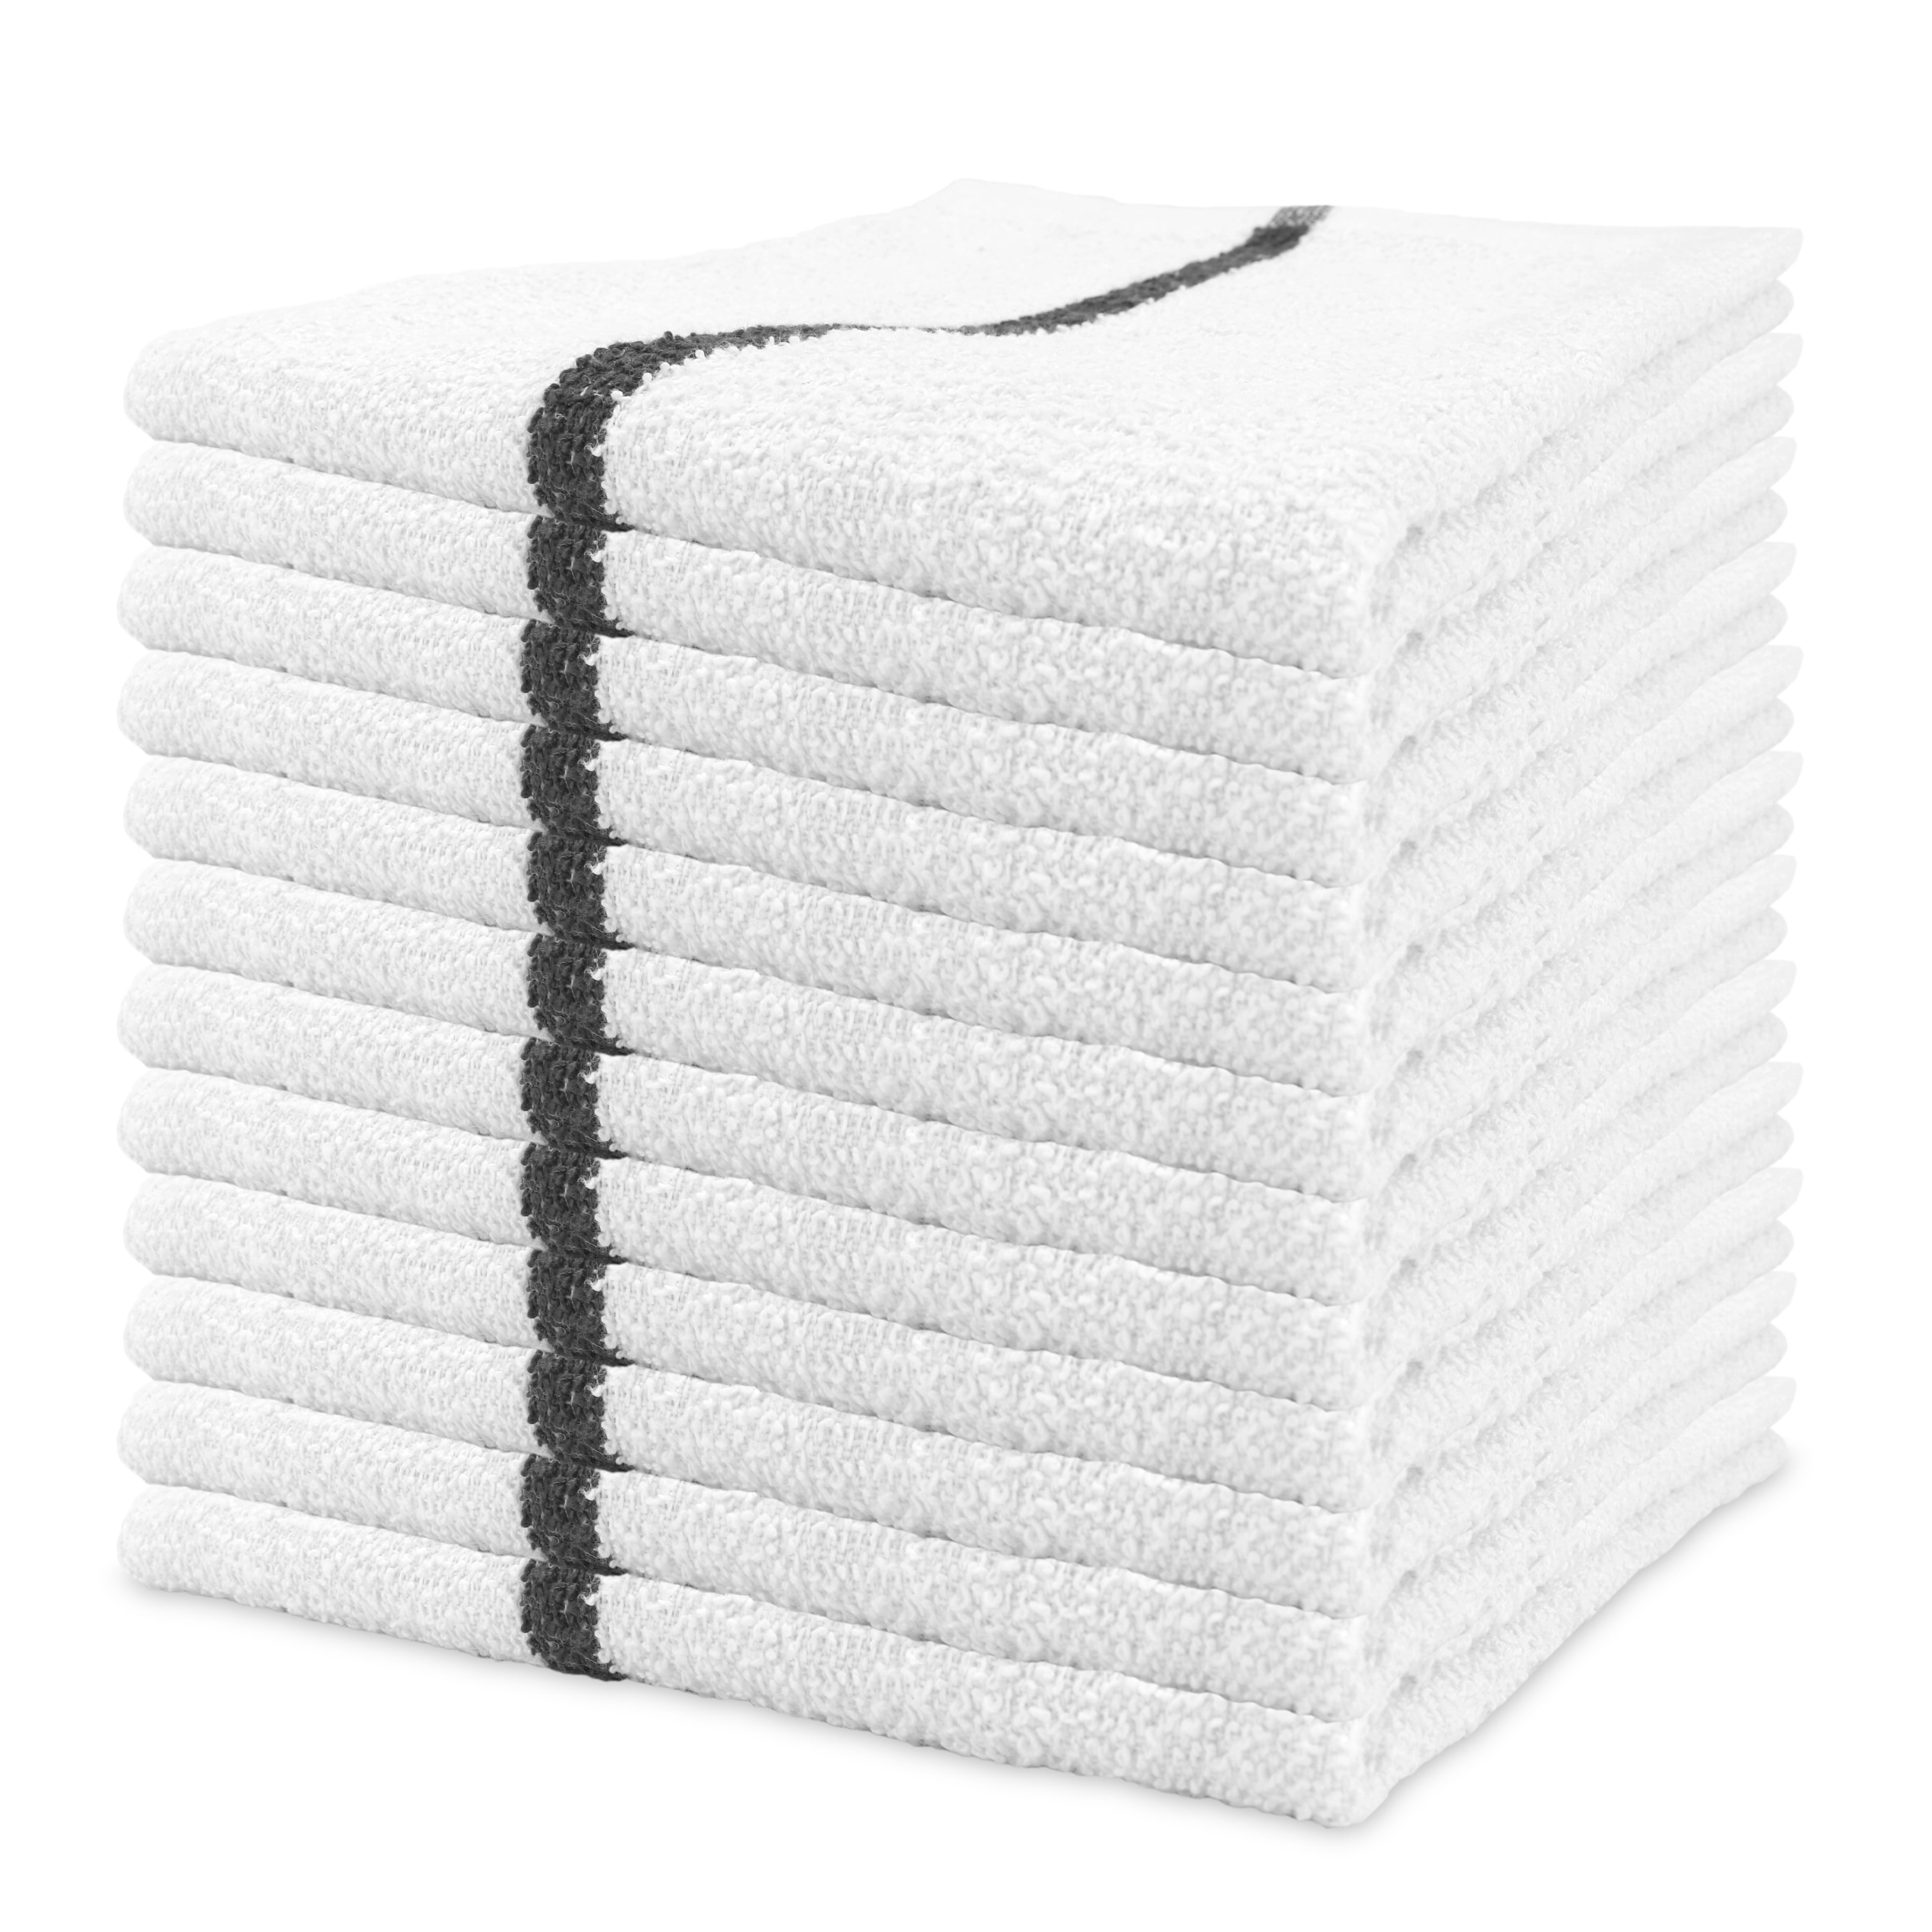 New Terry Bar Mop Towels Dozen - The Man Of The Cloth™